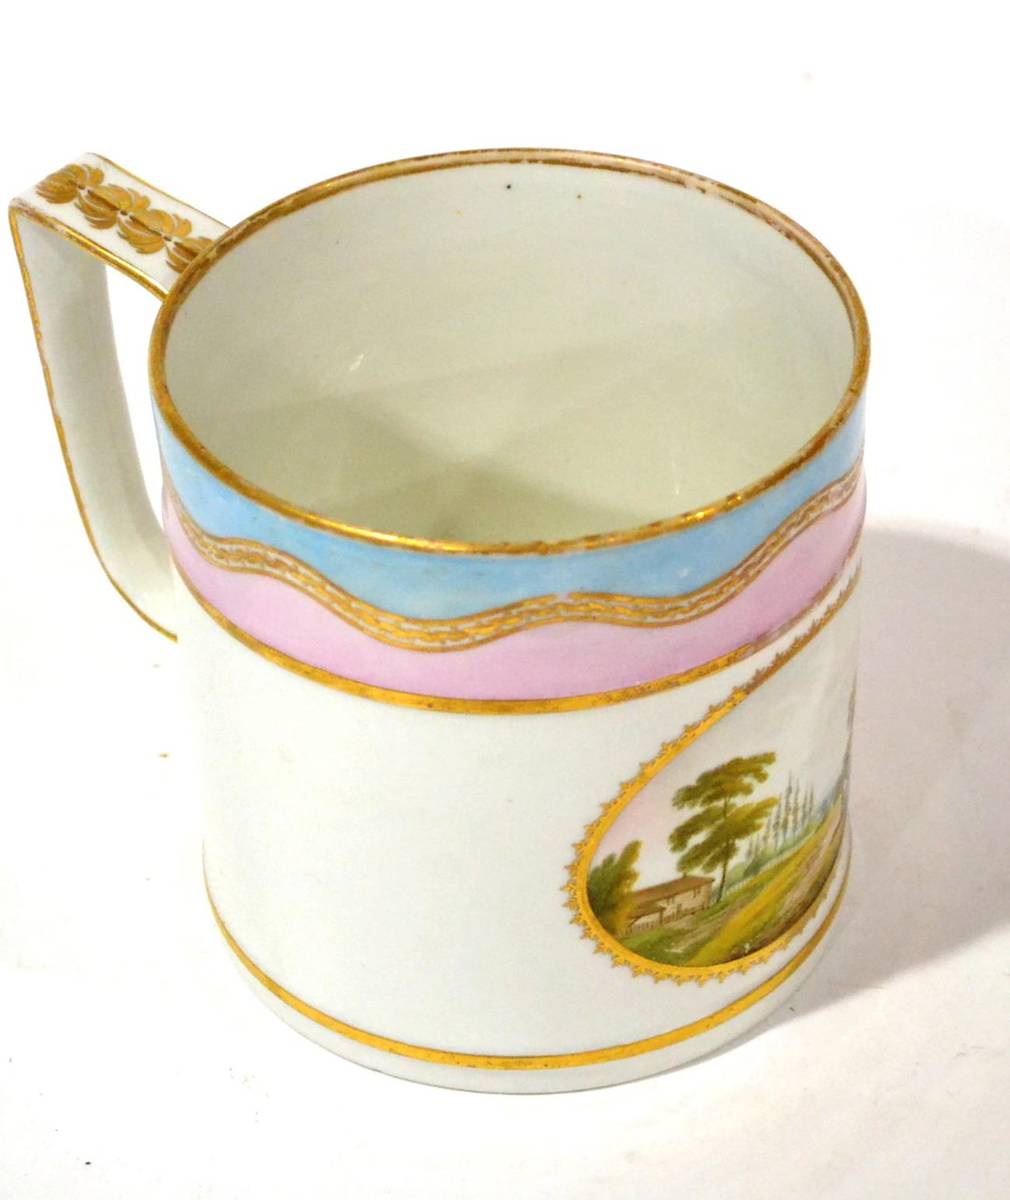 Lot 29 - A Derby Porcelain Porter Mug, circa 1790, painted with ";In Devonshire"; in an oval panel below...